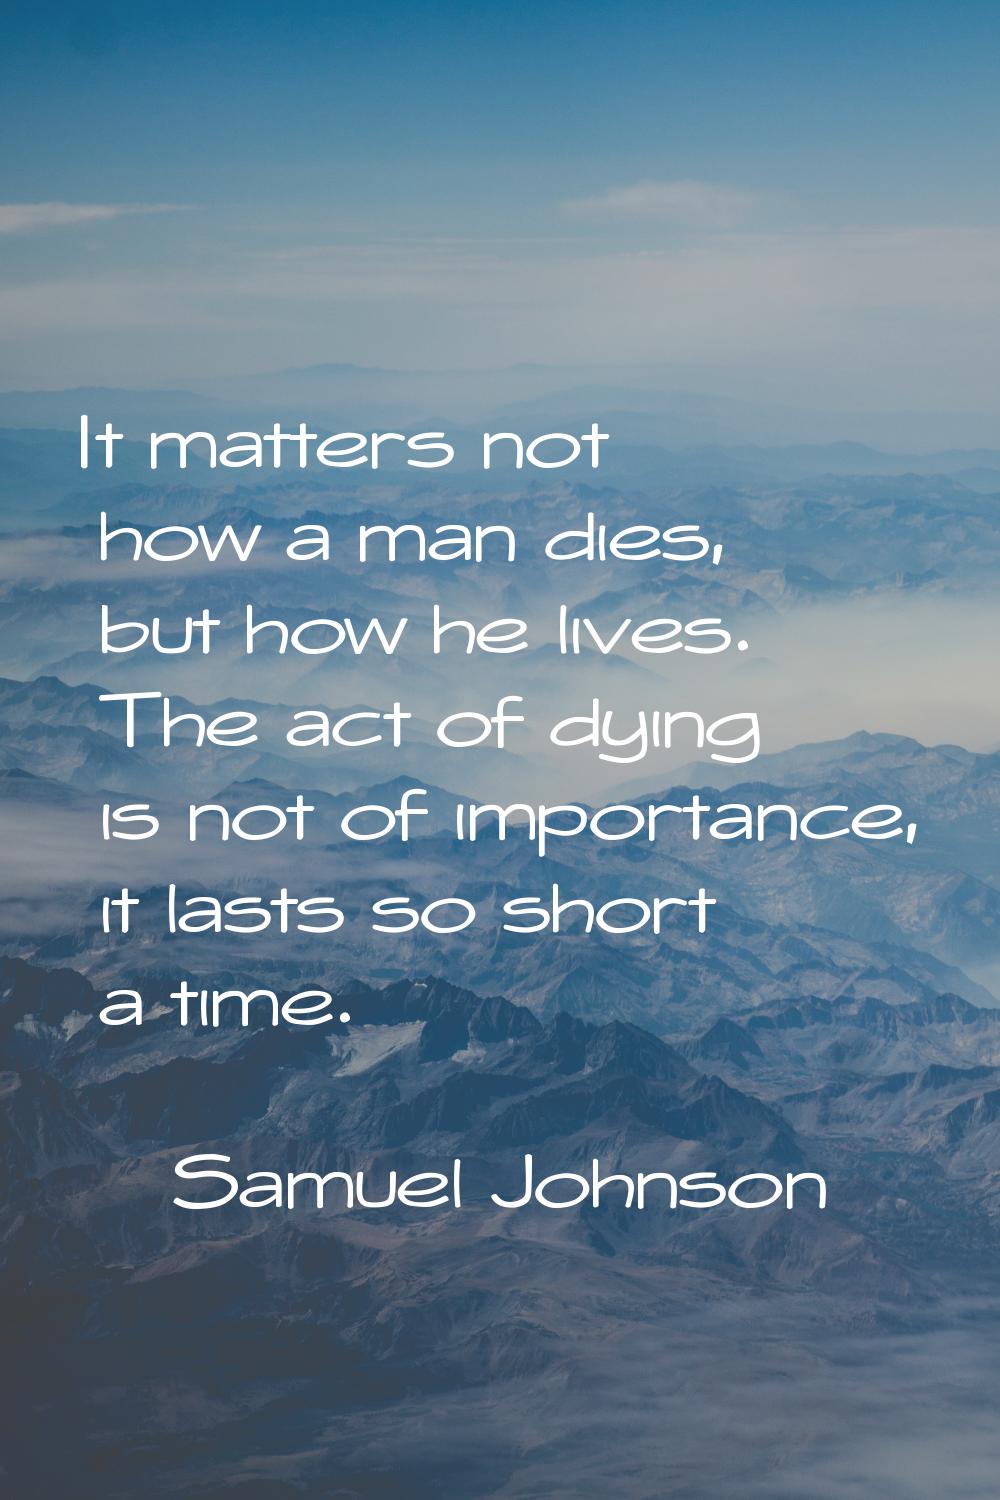 It matters not how a man dies, but how he lives. The act of dying is not of importance, it lasts so